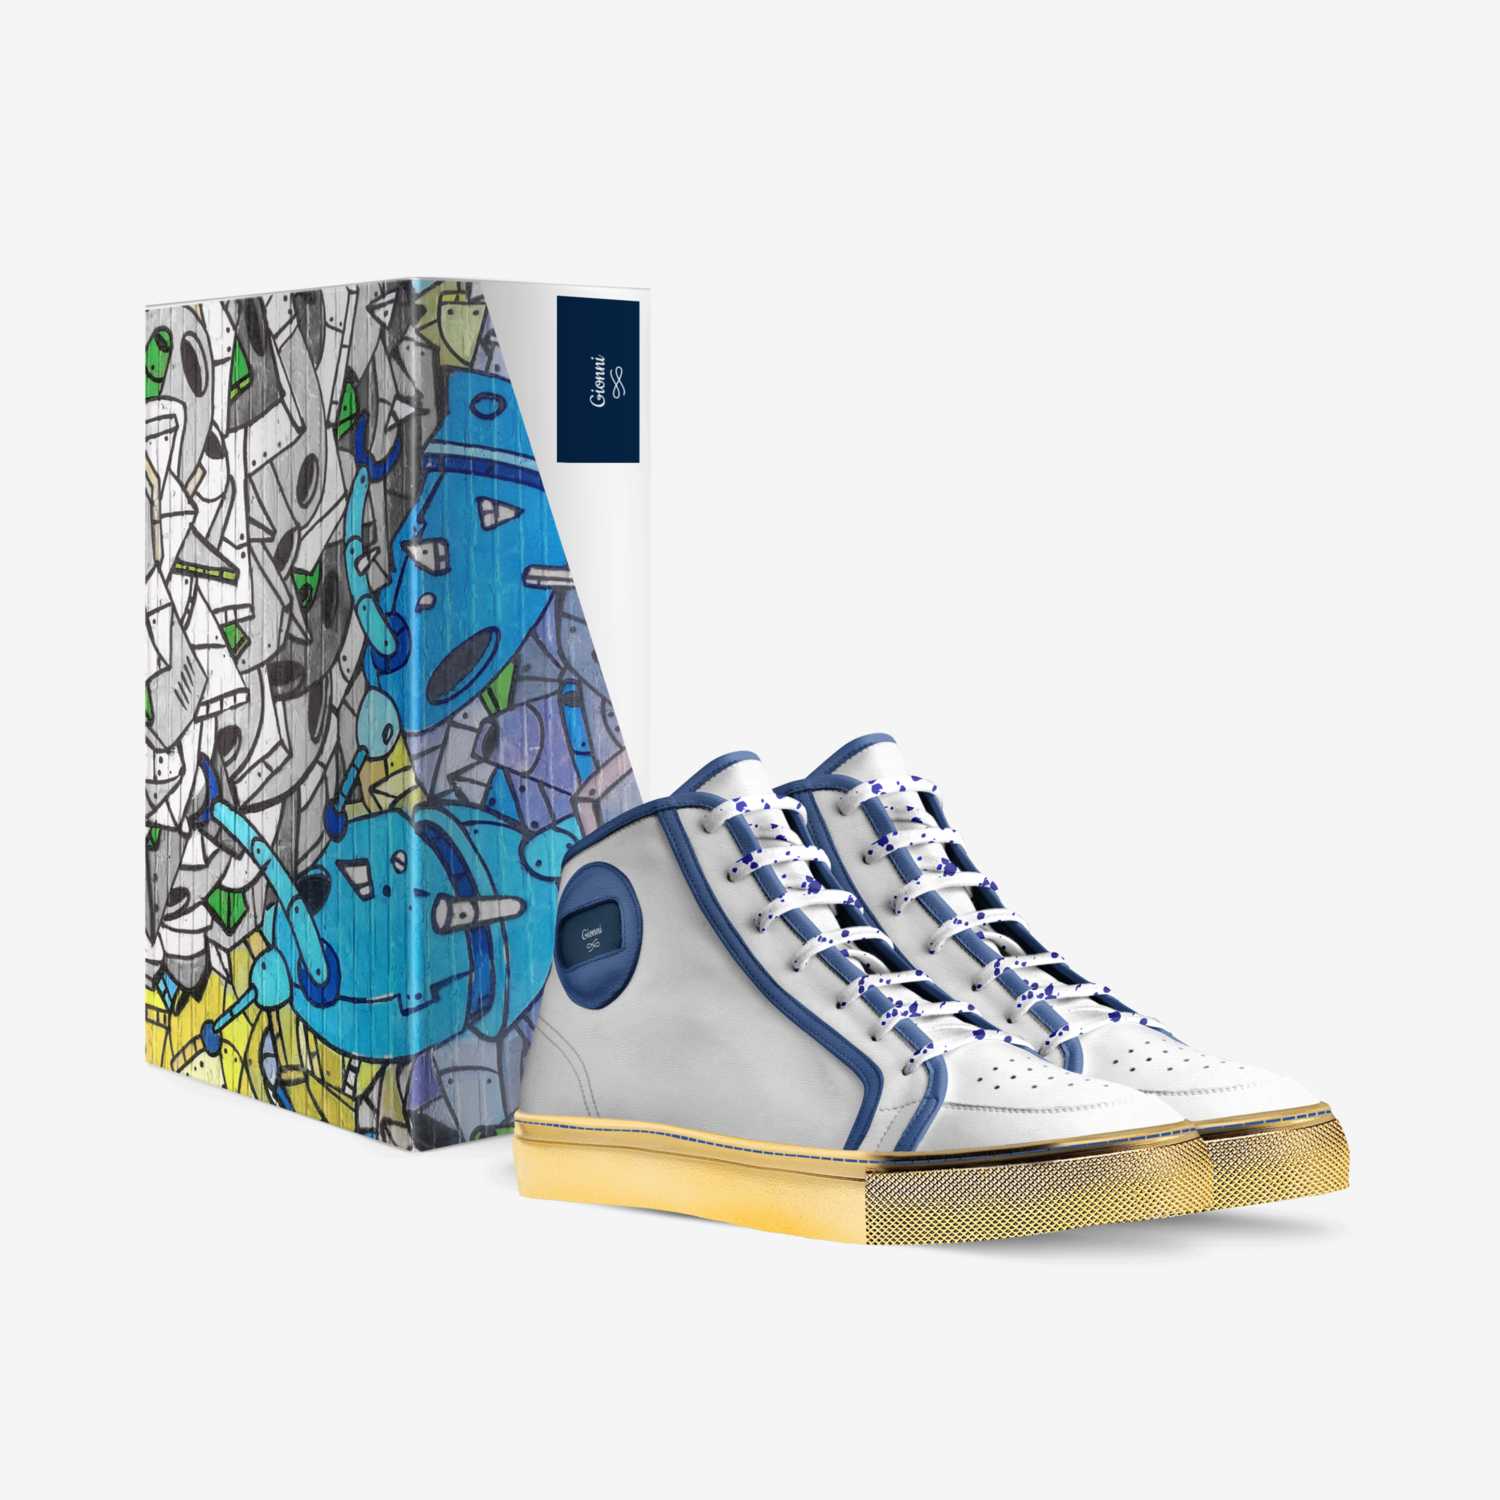 Gio Aquarius  custom made in Italy shoes by Gionni Pierre | Box view